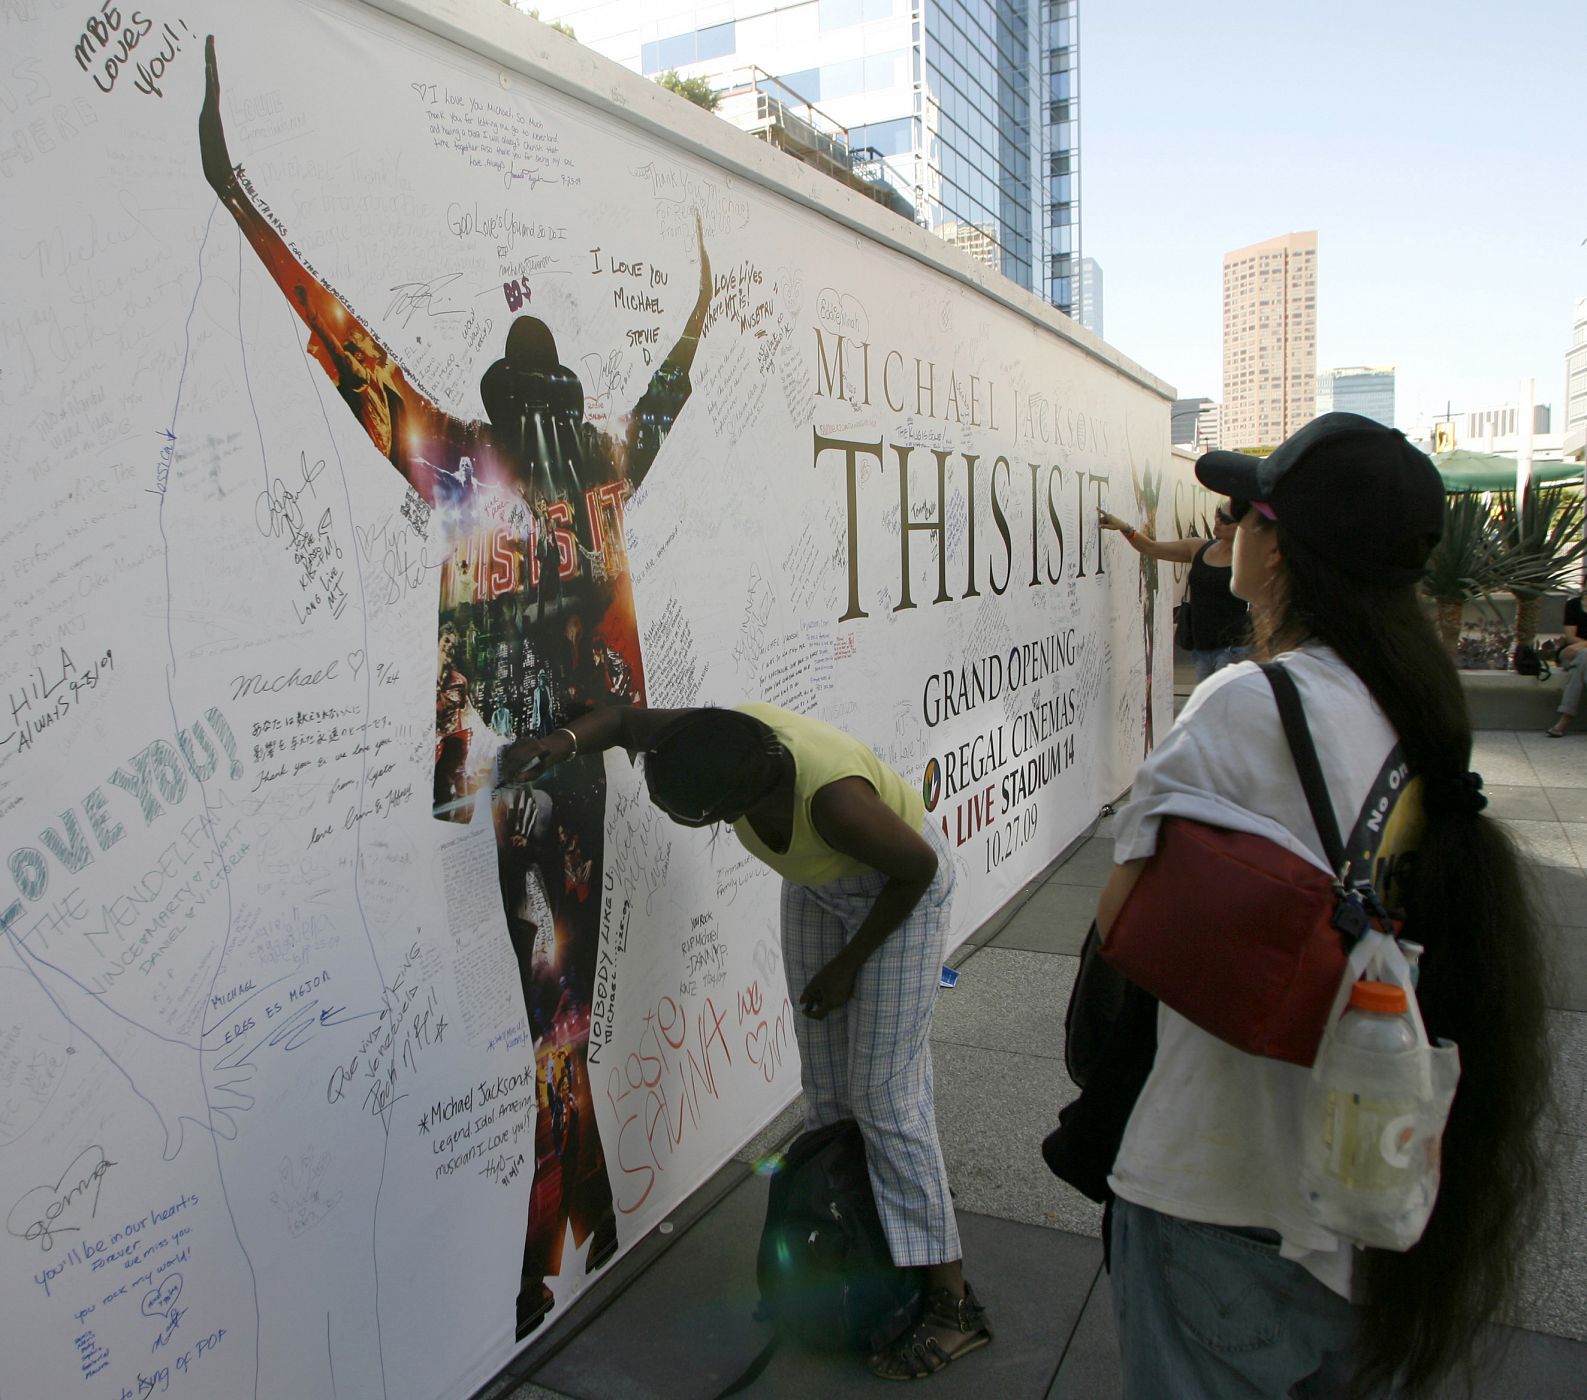 A woman signs a tribute wall for Michael Jackson at the L.A. Live complex